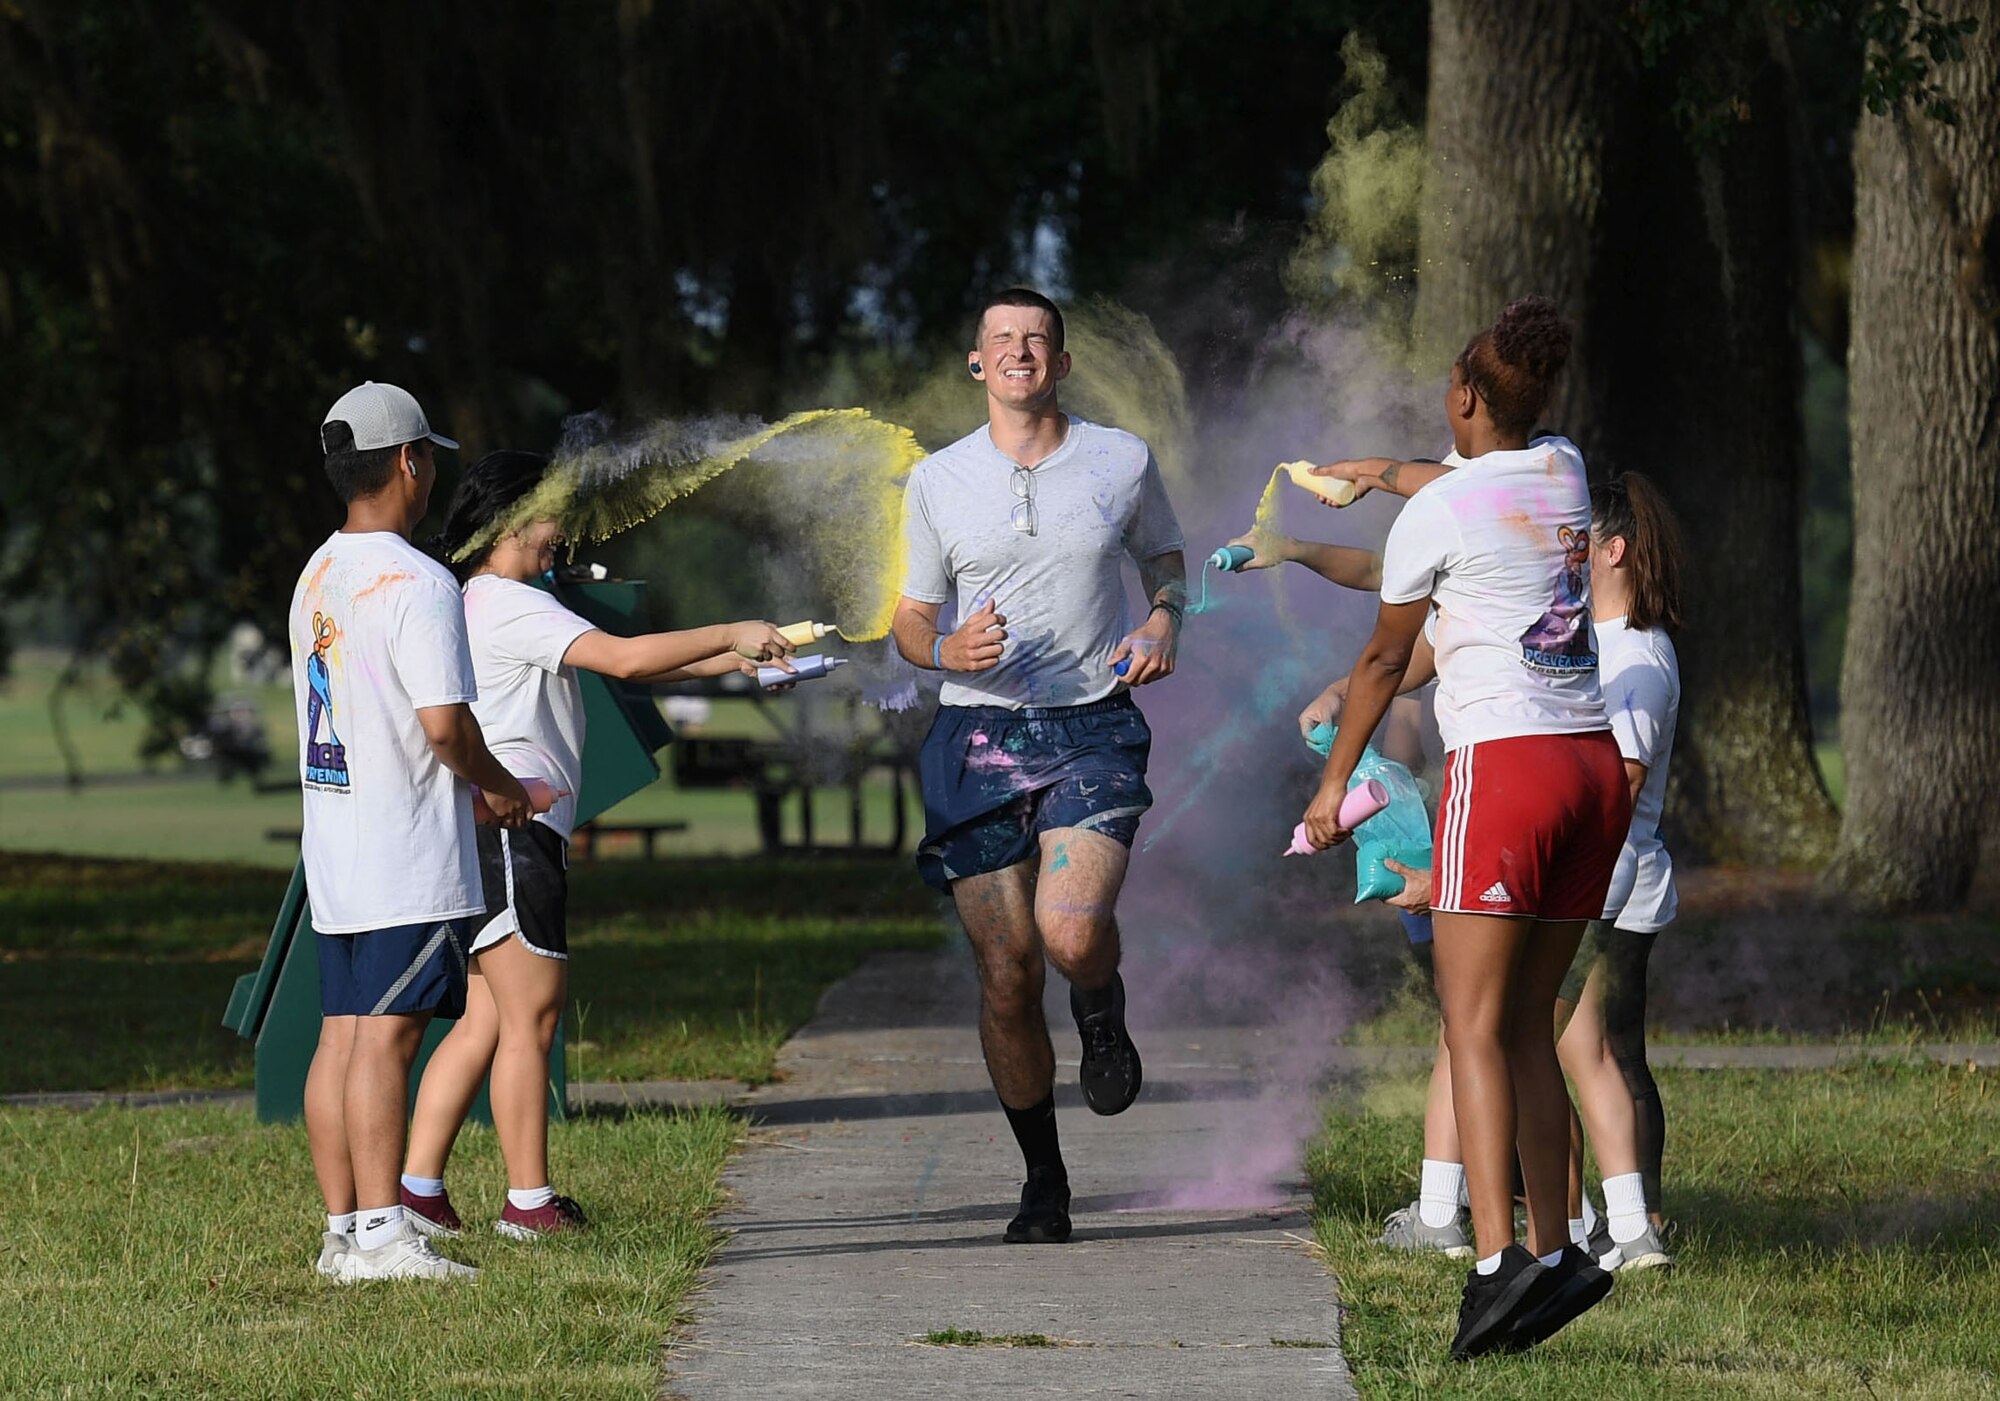 Keesler personnel participate in the Suicide Prevention Color Run at marina park at Keesler Air Force Base, Mississippi, June 16, 2022. More than 250 runners and 70 volunteers participated in the Air Force Sergeants Association Chapter 652 hosted event. (U.S. Air Force photo by Kemberly Groue)